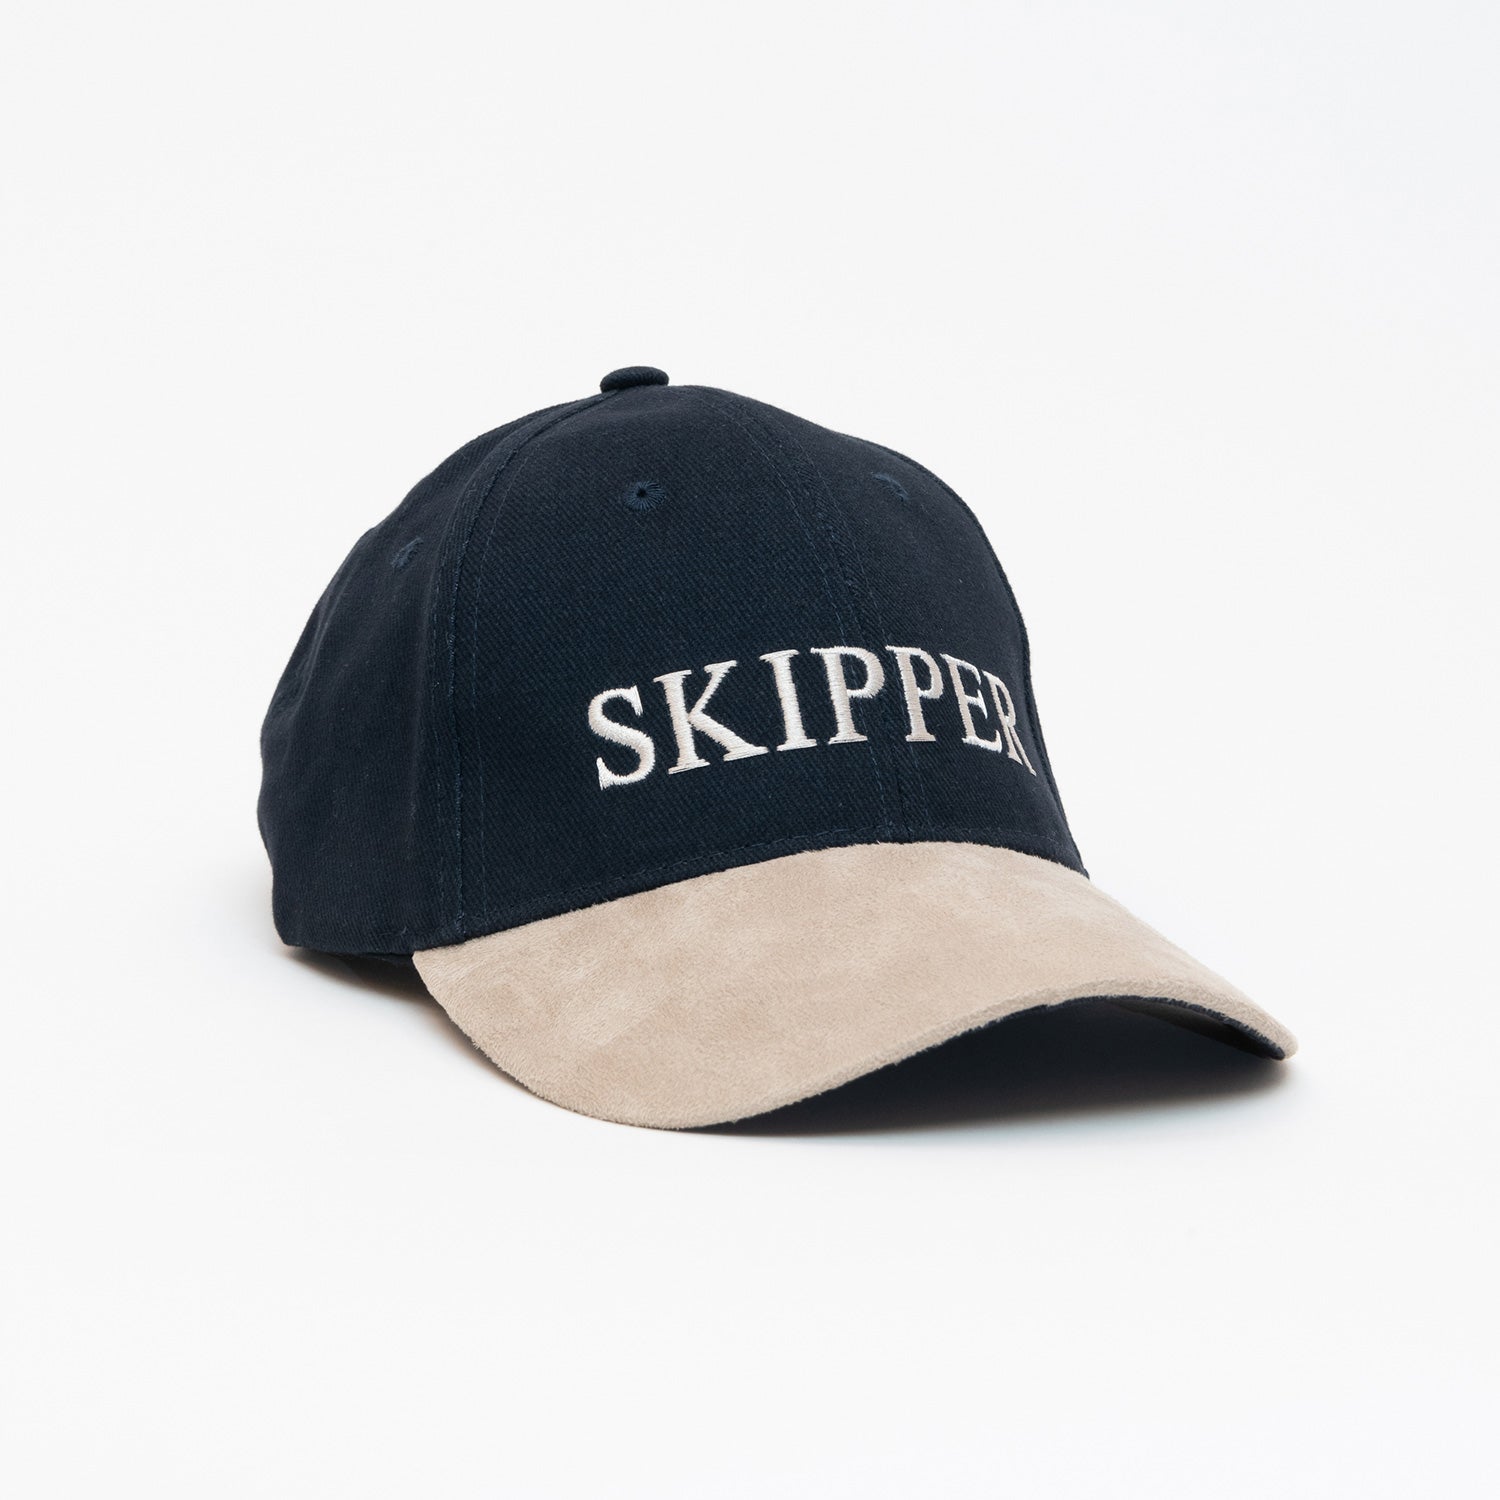 A black hat with beige peak, and the word 'Skipper' sewn onto the front. Photographed on a white background.